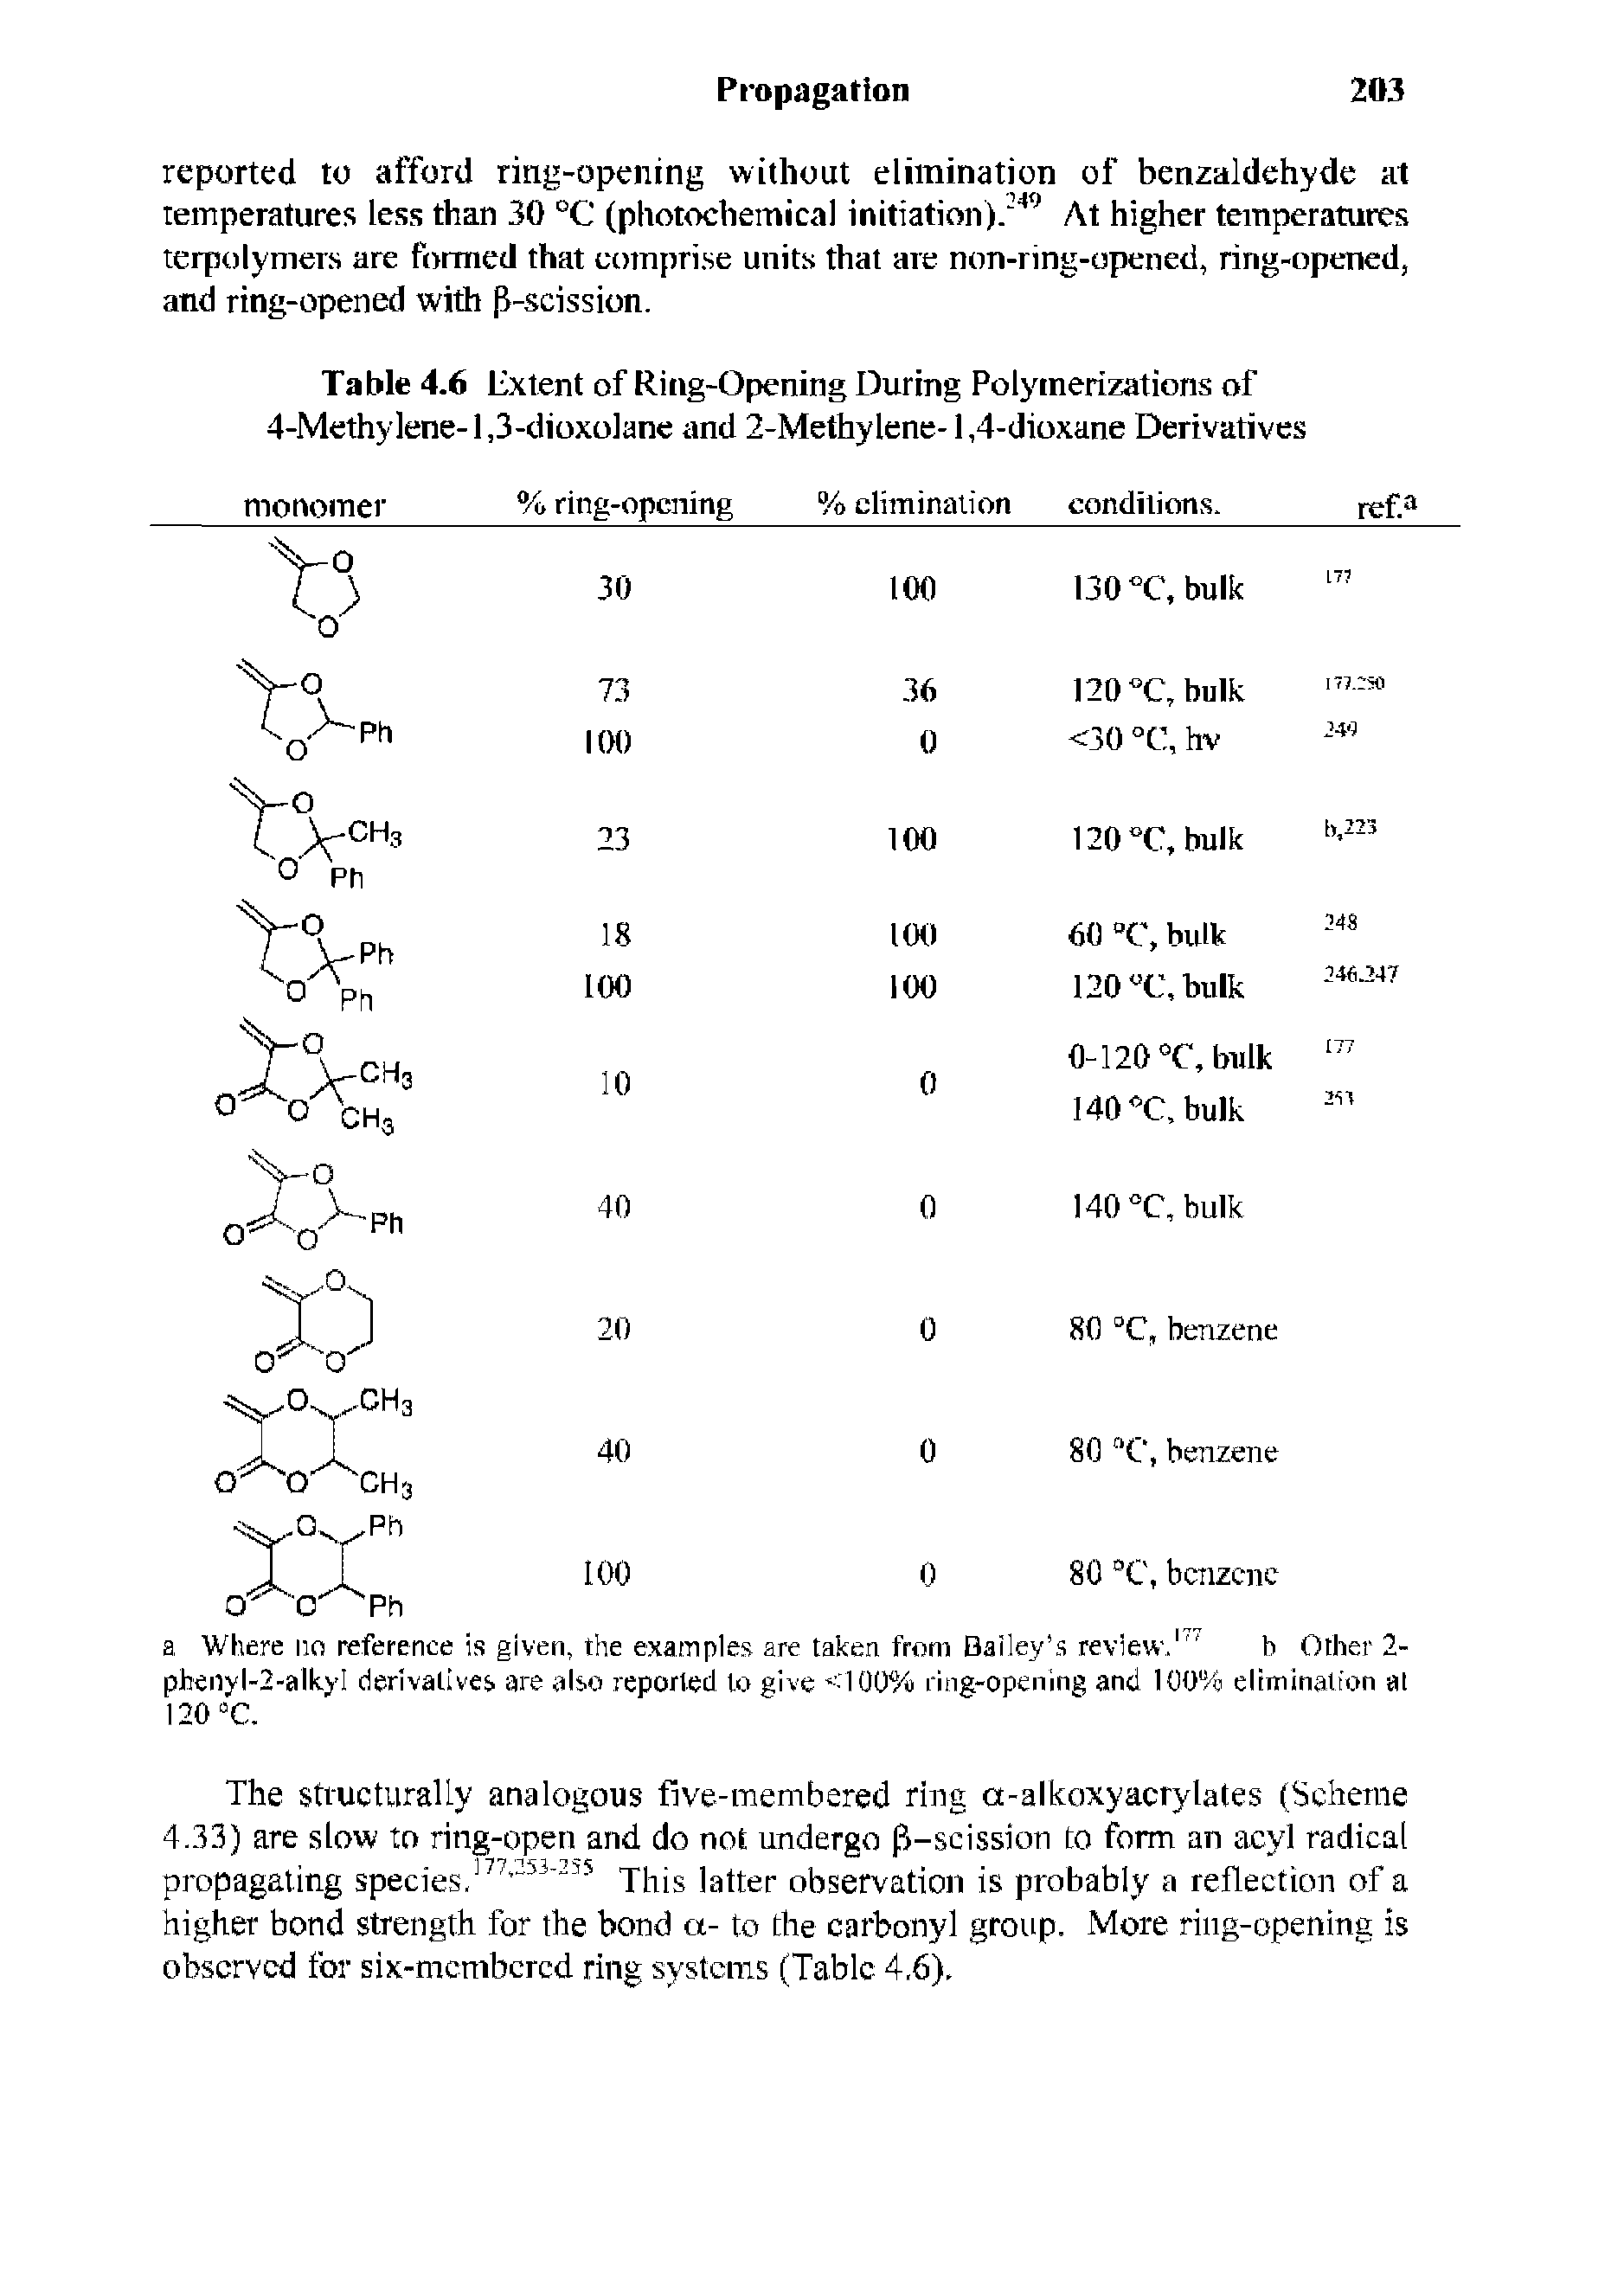 Table 4.6 Extent of Ring-Opening During Polymerizations of 4-Methylene-1,3-dioxolane and 2-Methylene-1,4-dioxane Derivatives...